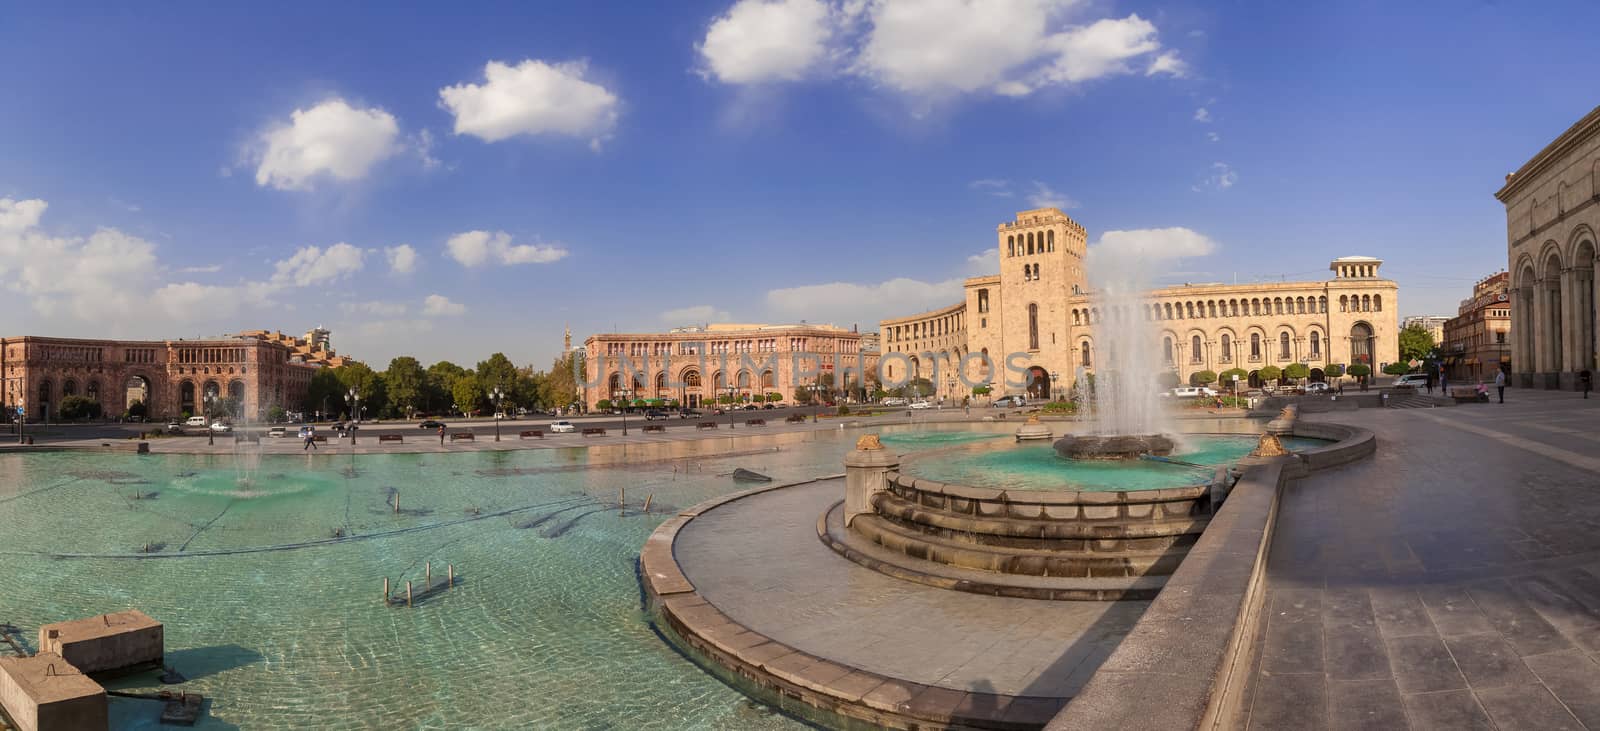 The fountain on a central square of the city of Yerevan in Armenia